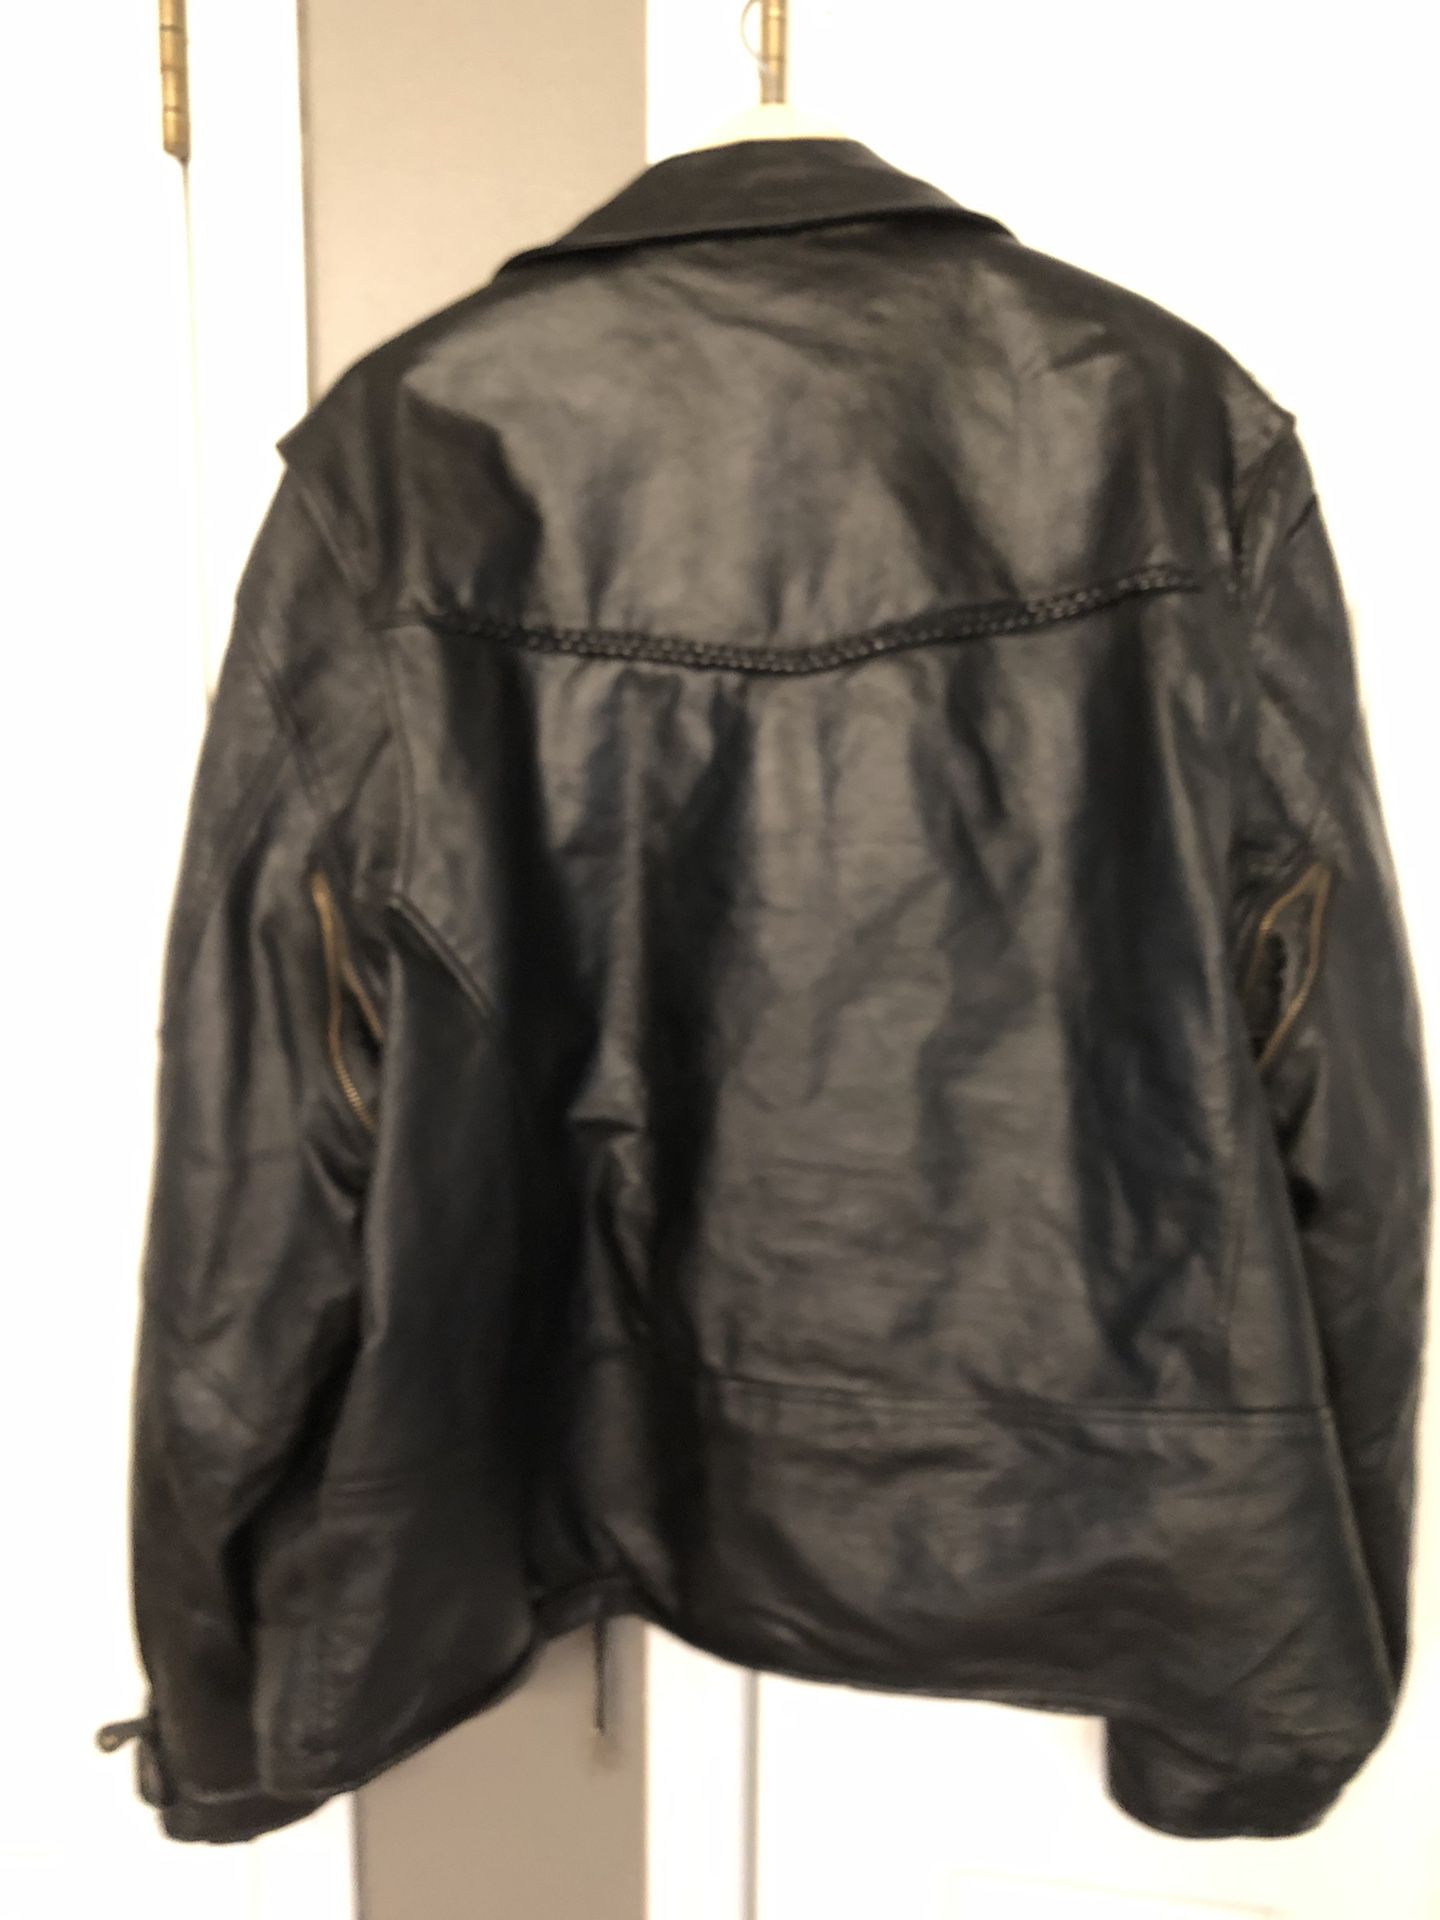 Riding Leather Jacket ( for motorcycle) Vented Mans Size 52 very heavy